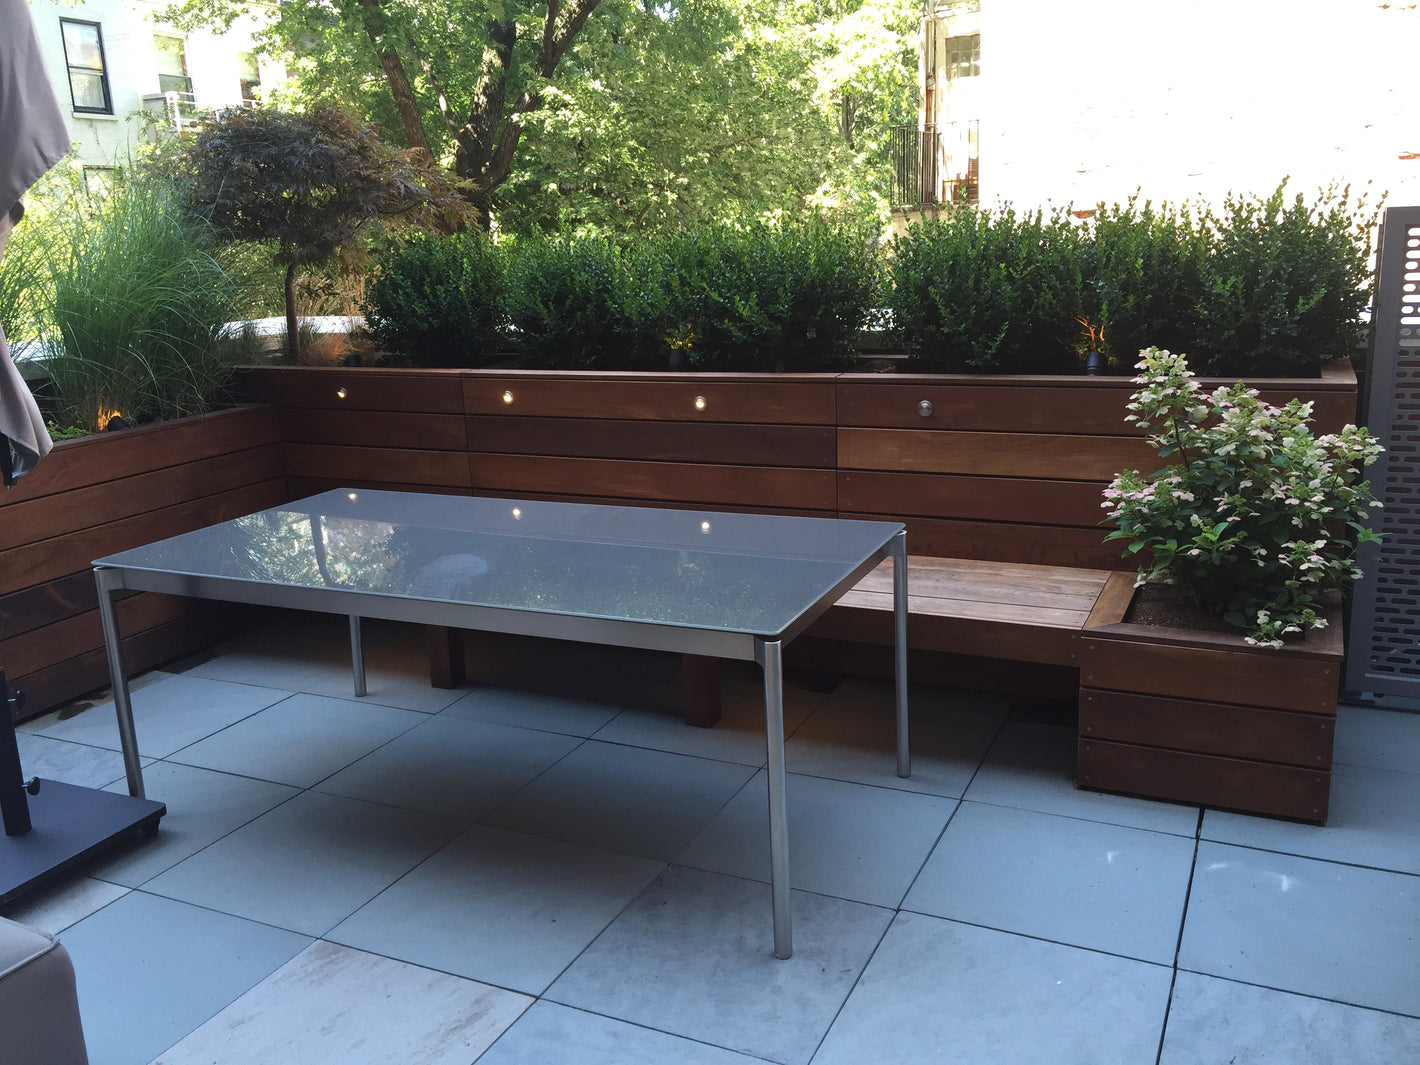 Custom outdoor ipe bench with planters and outdoor lighting created by TCSC